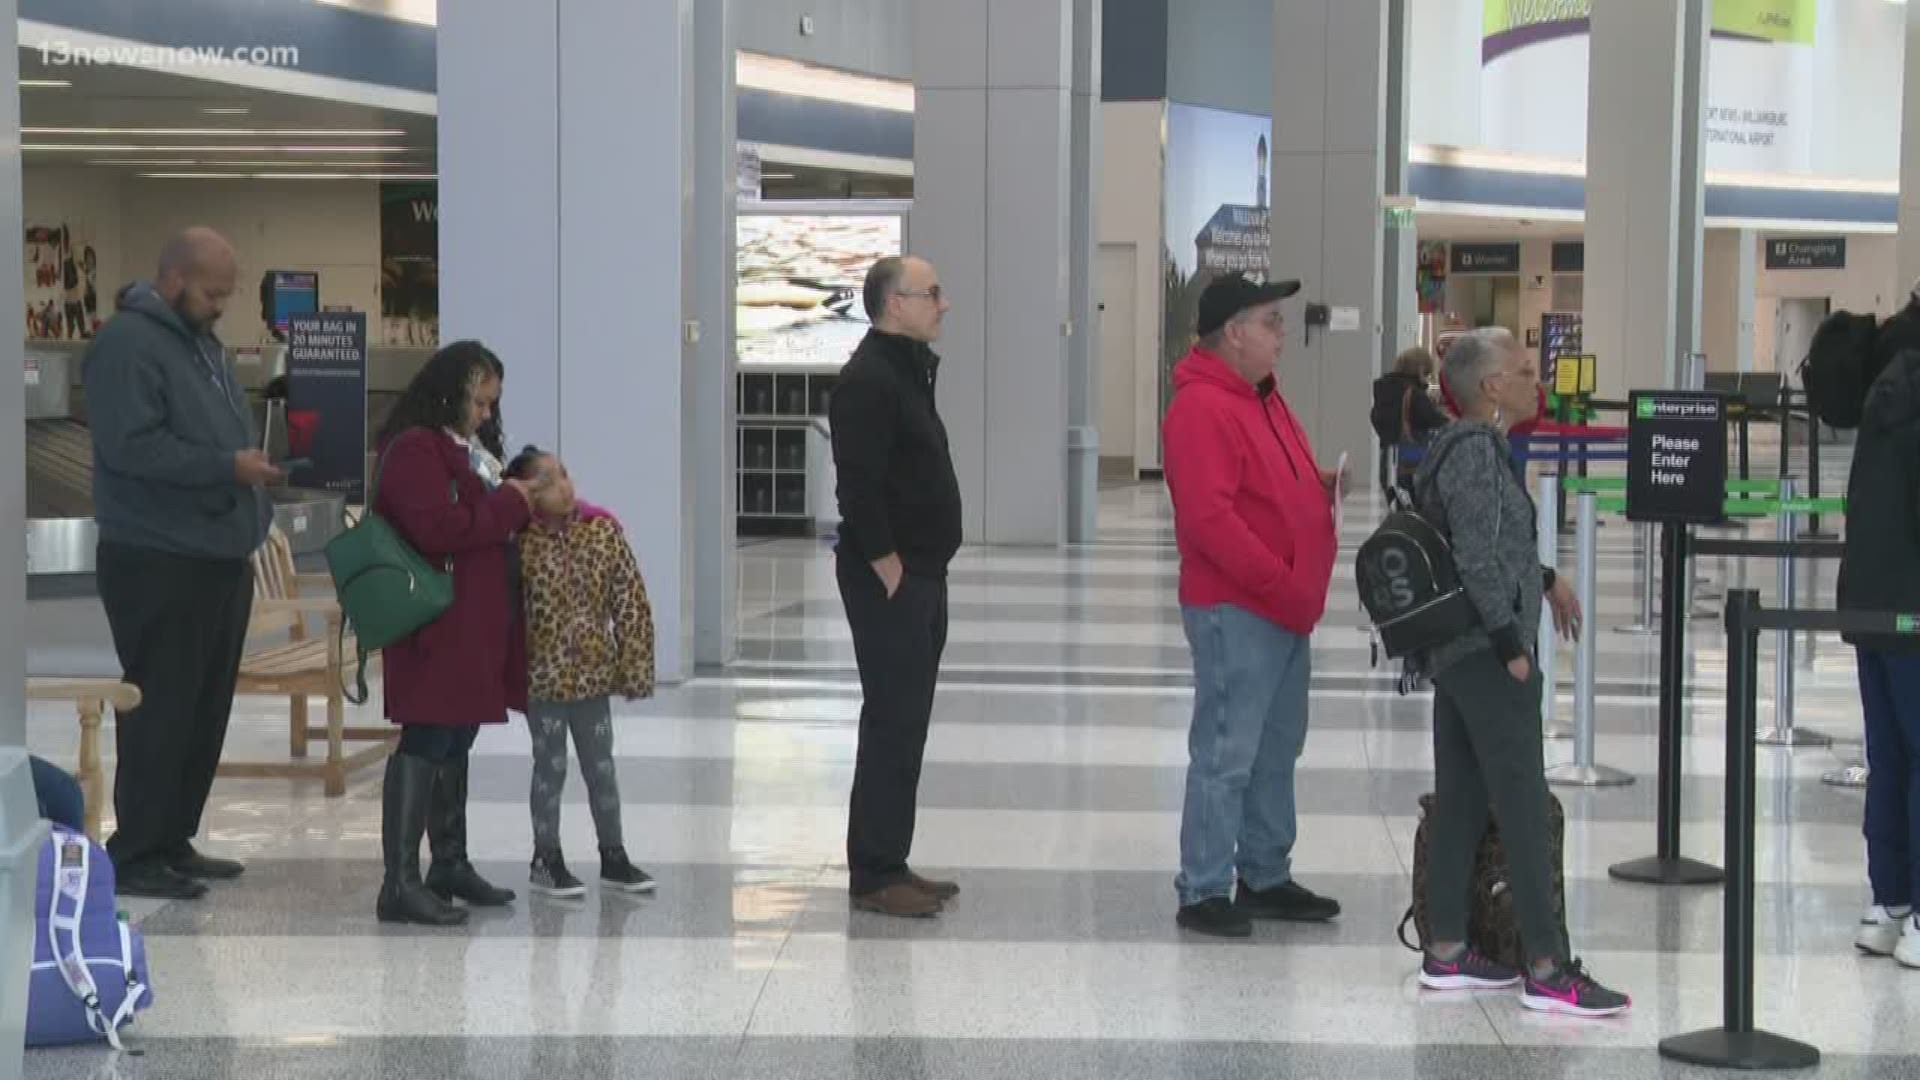 While the crowds were a bit smaller than at other airports, travelers were still waiting at security to get to their gates for their holiday travel plans.